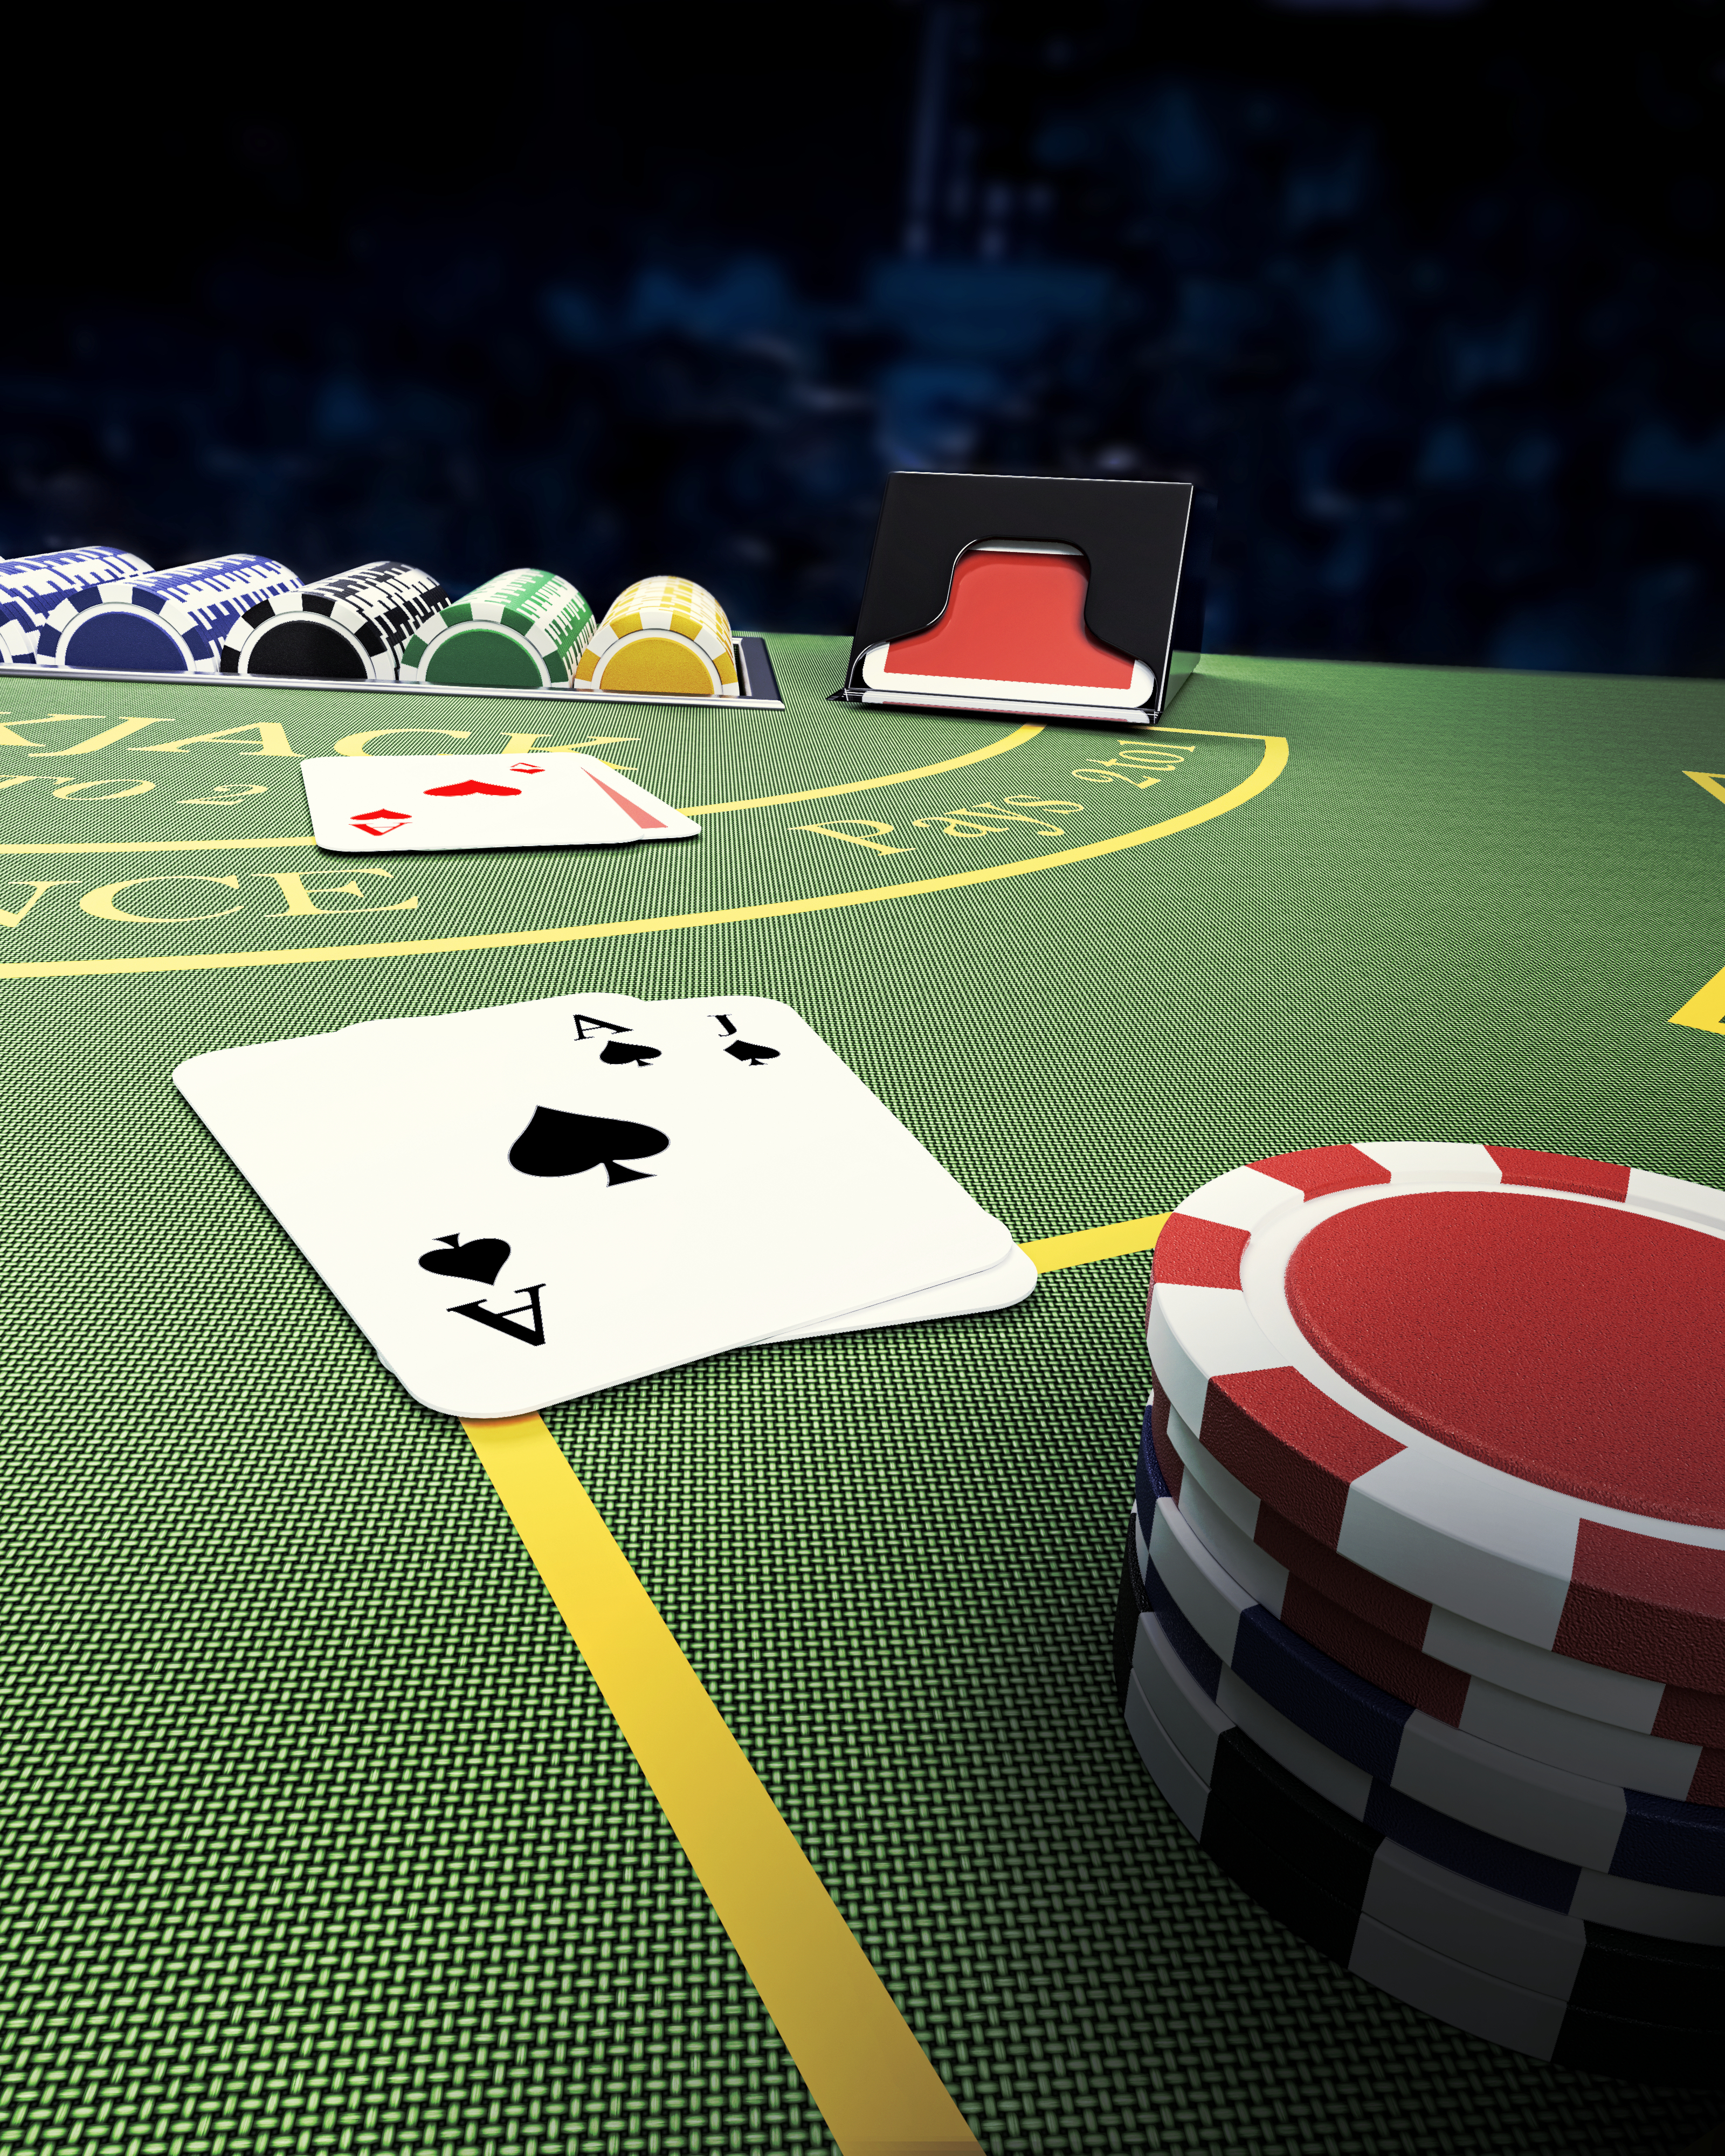 The Rules Of Blackjack Are Fairly Simple You Want To Get 21 Without Going Over But Winning Against A Professional